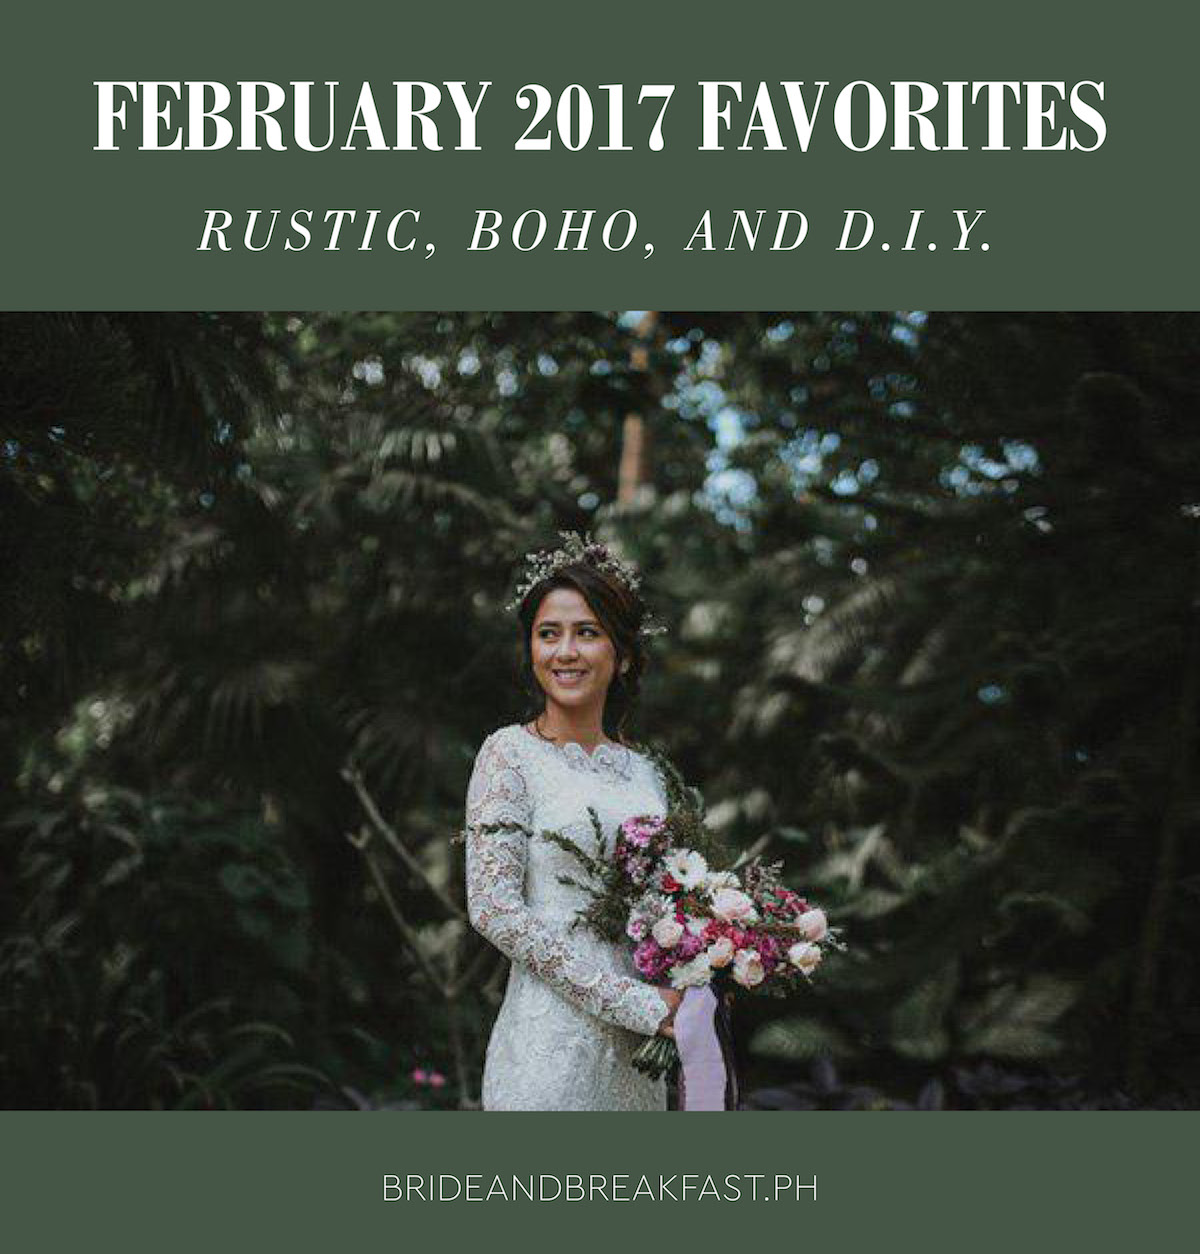 February 2017 Favorites Rustic, Boho, and D.I.Y.